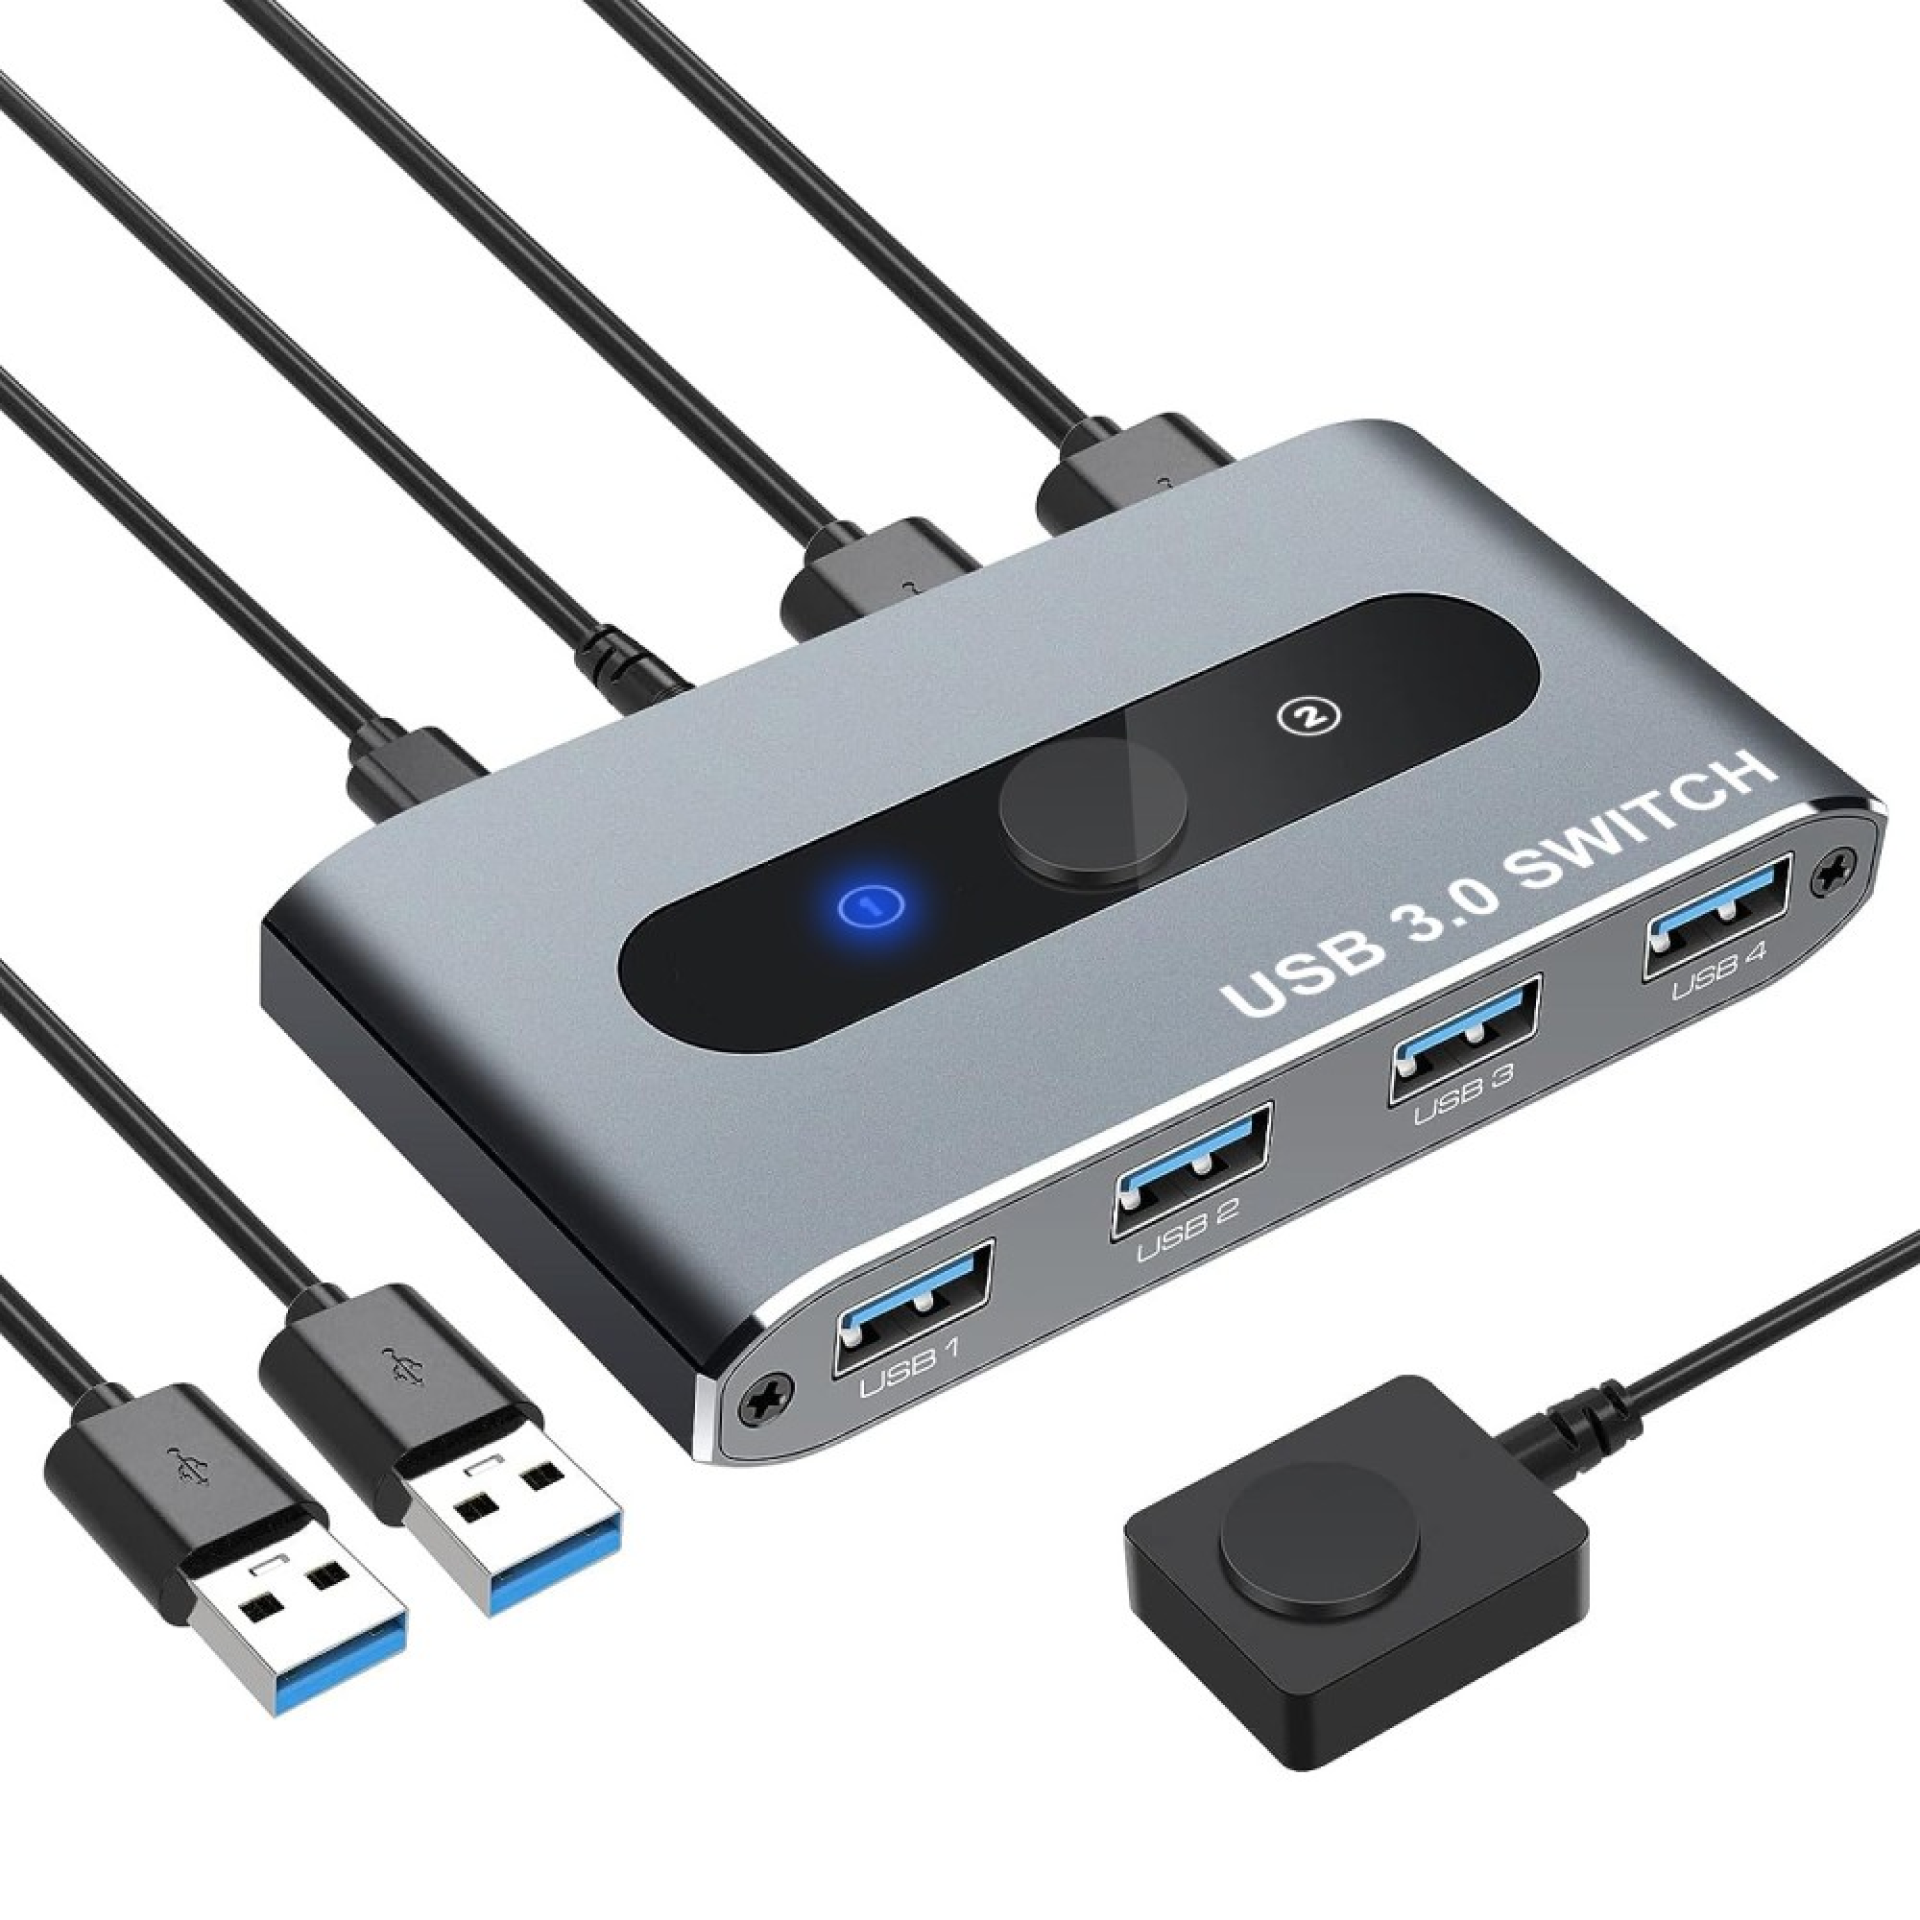 Techly USB 3.0 Switch 2 PC inputs 4 PC outputs